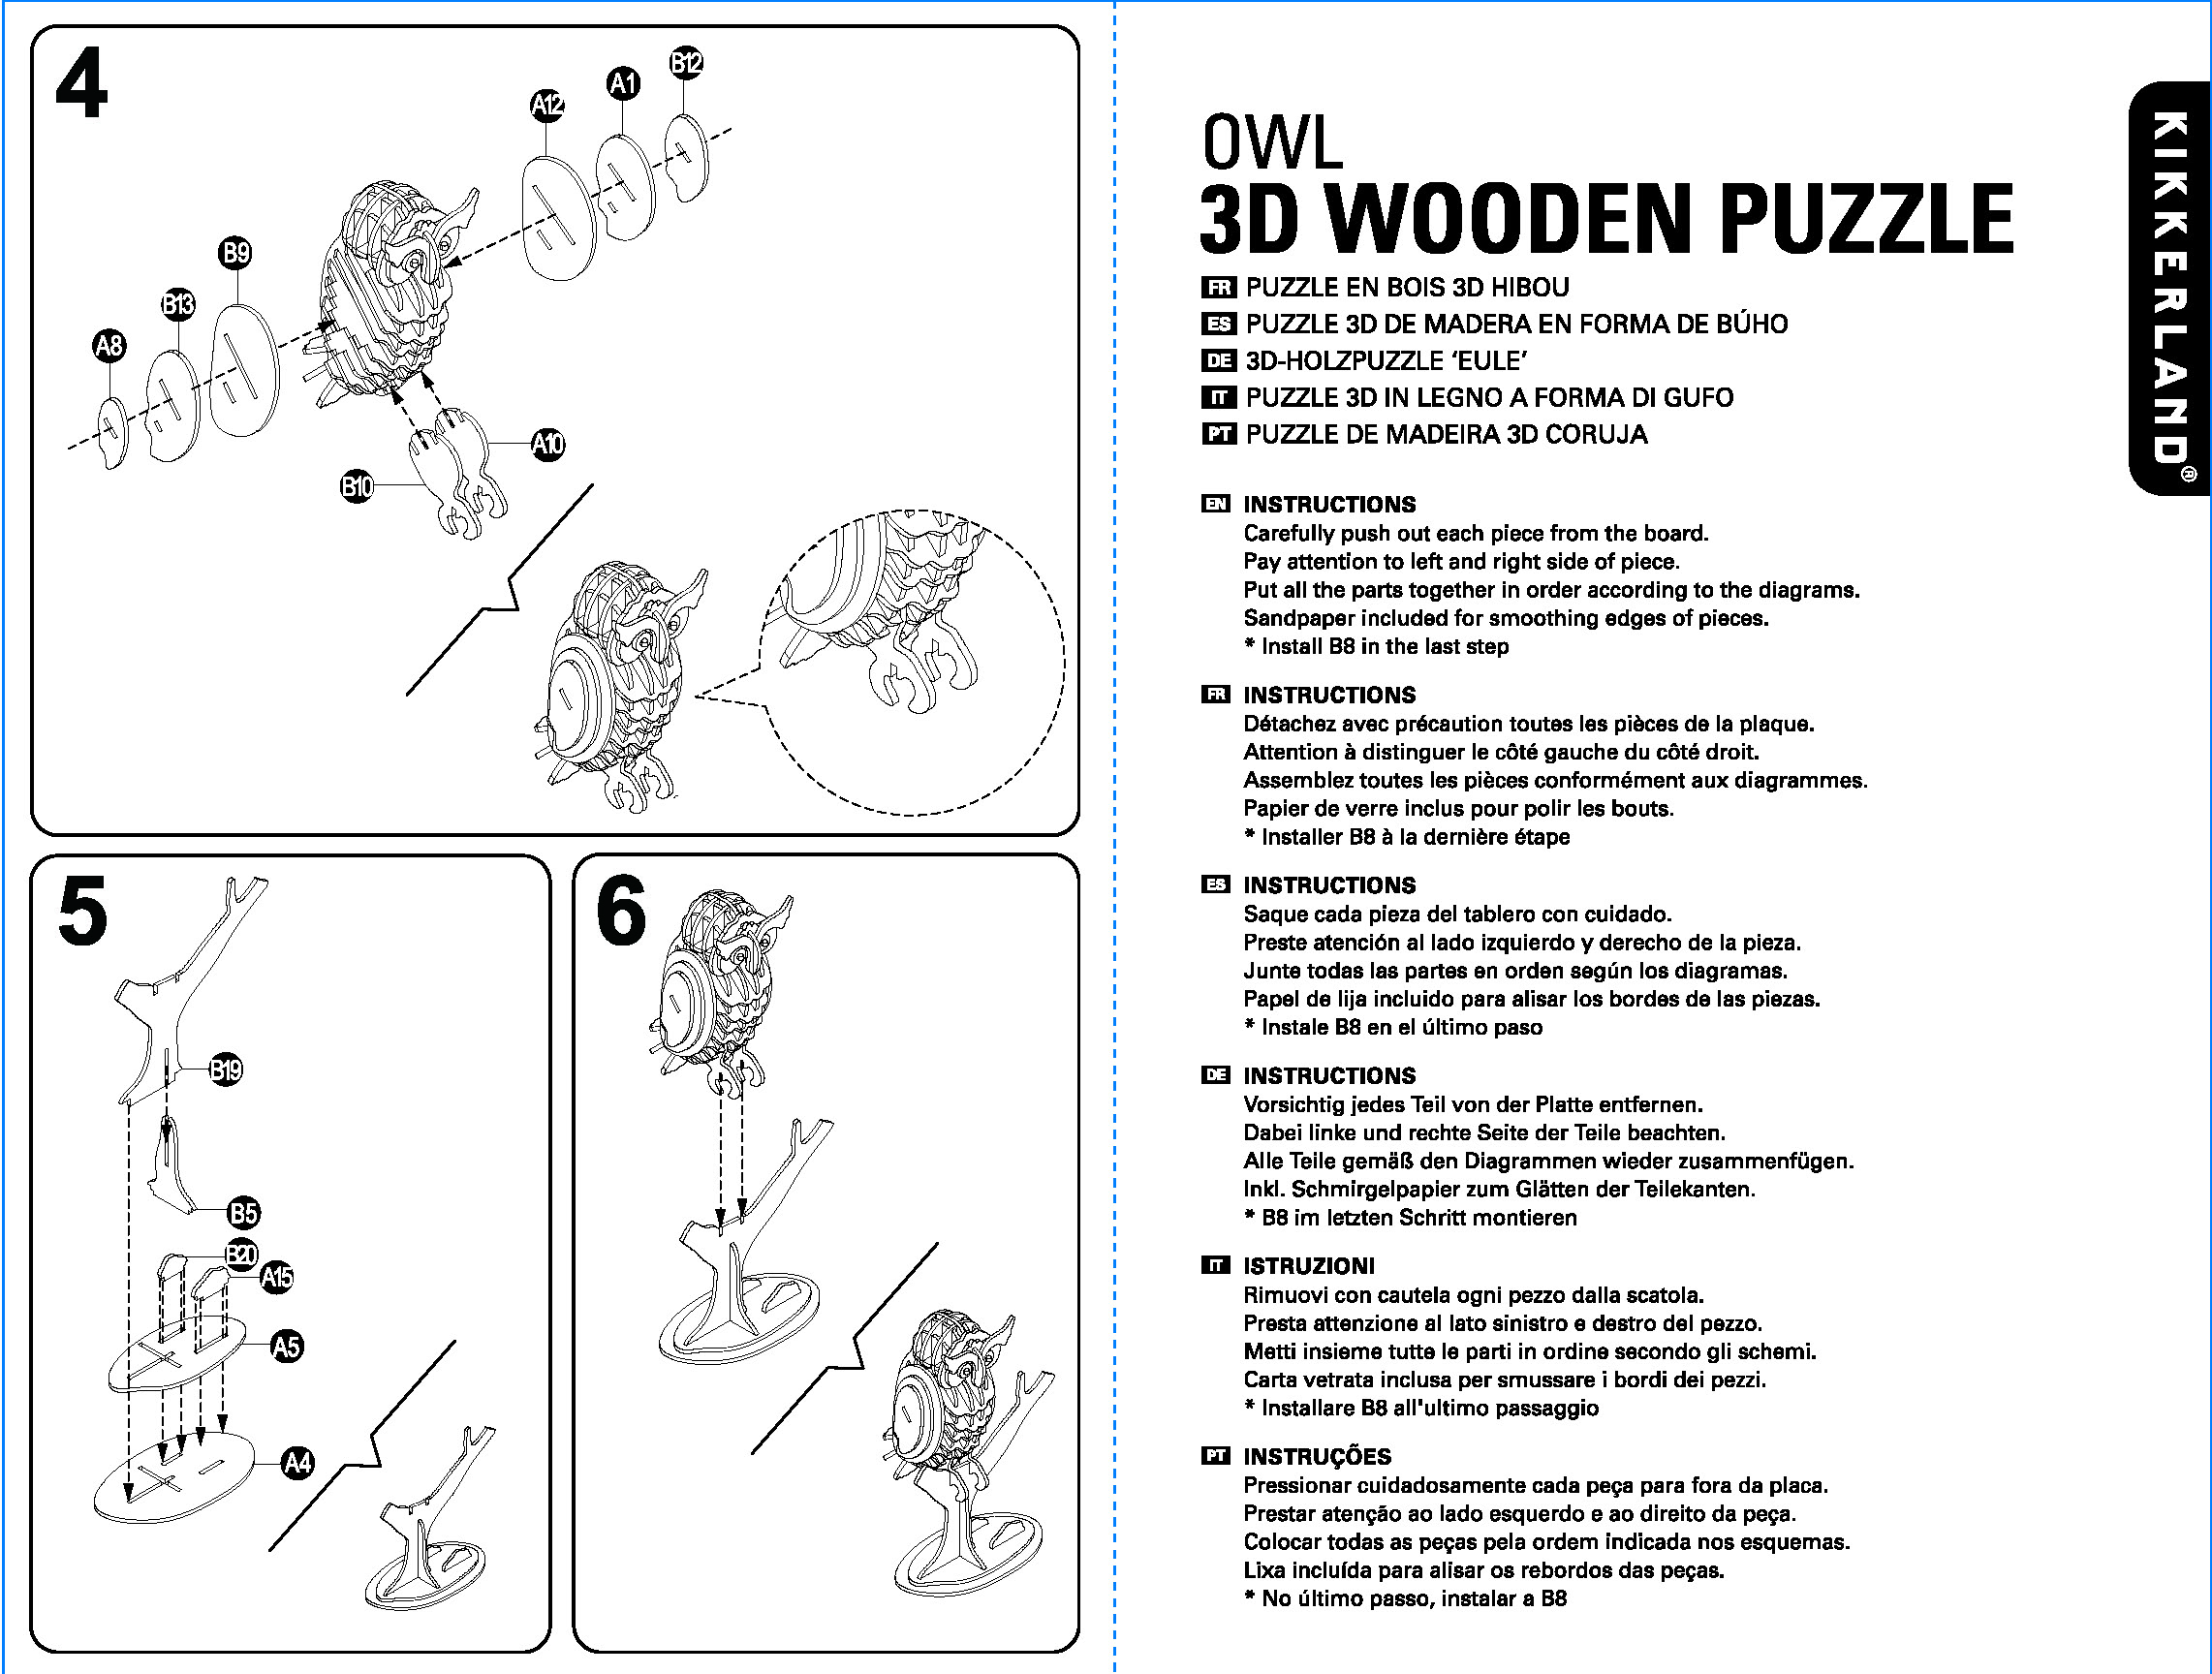 GG107_Owl_3D_Wooden_Puzzle_Instructions_Page_1.jpg